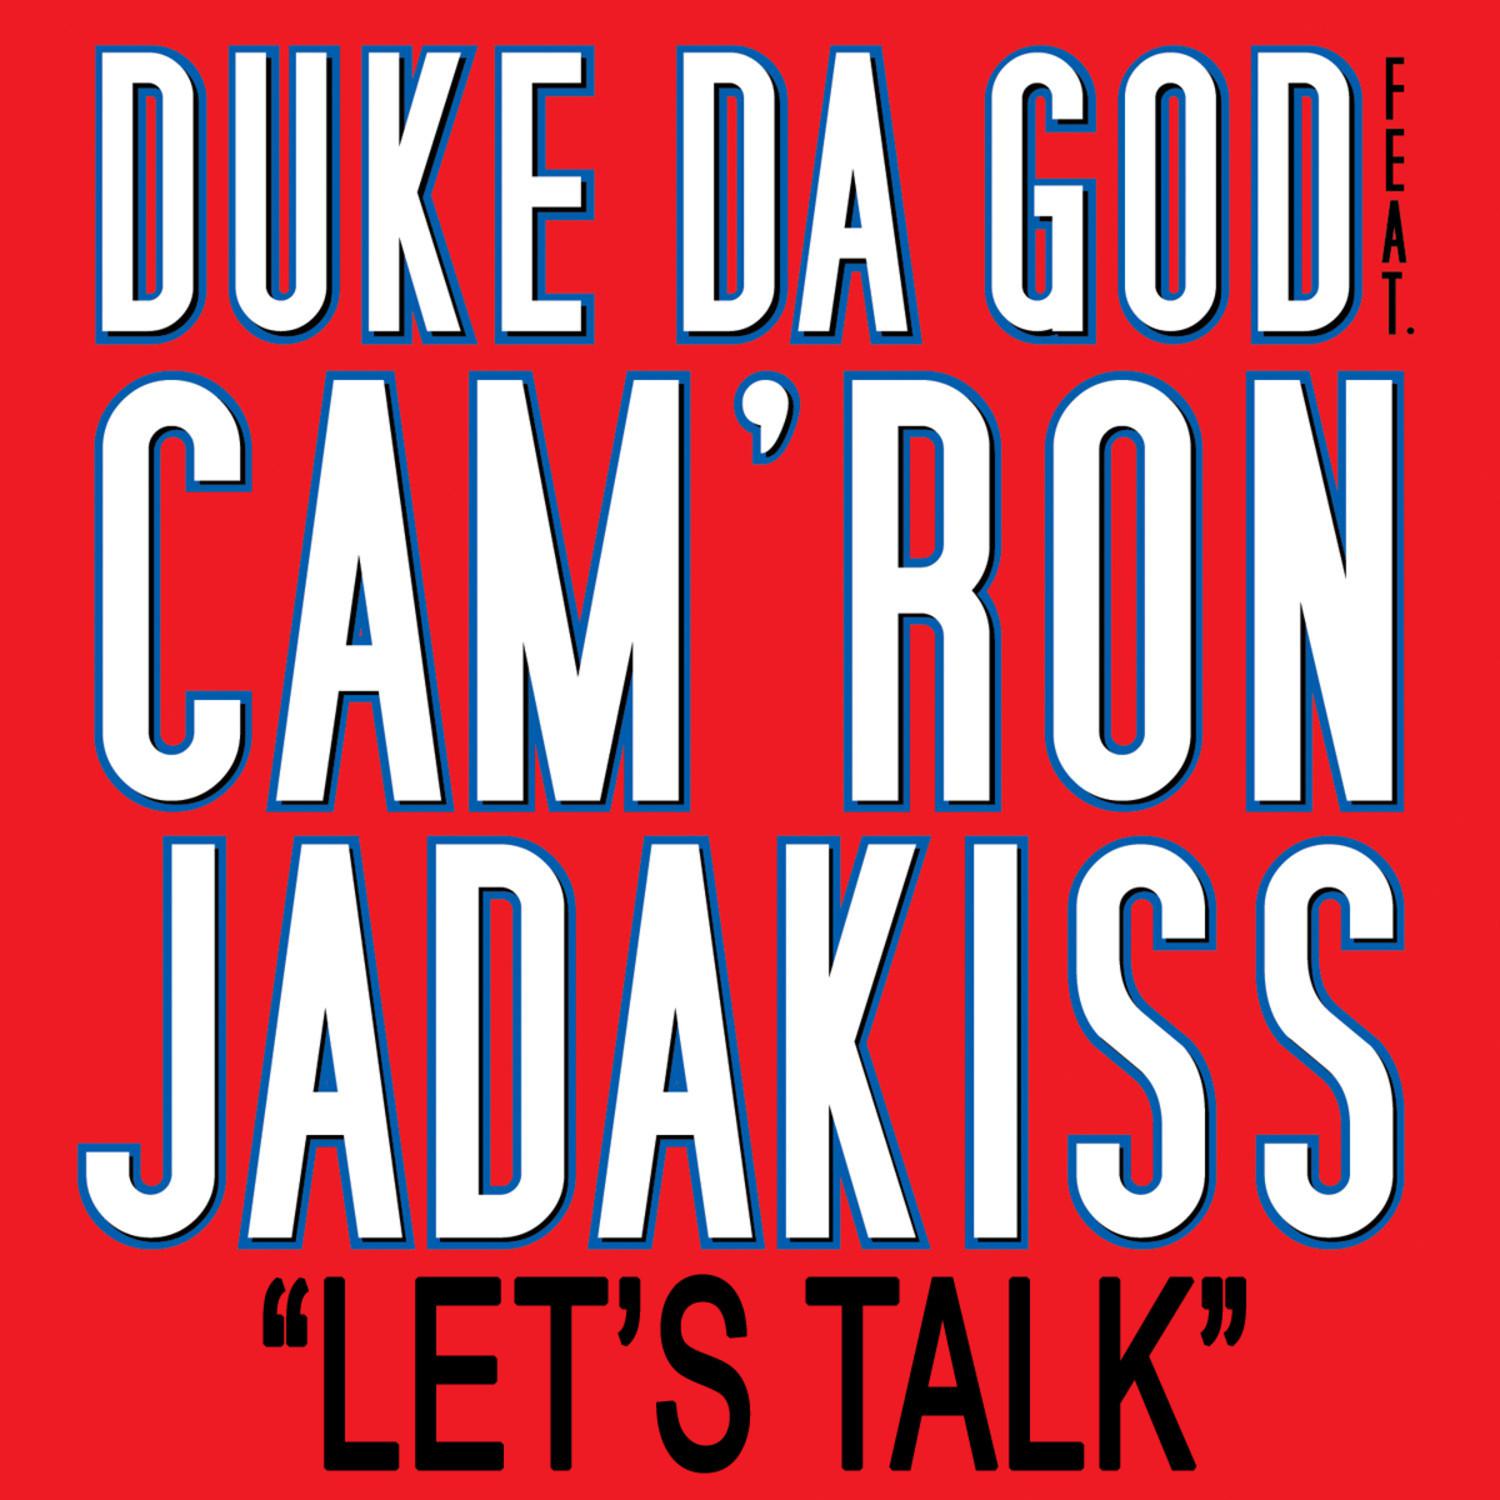 Let's Talk (feat. Jadakiss and Cam'ron)